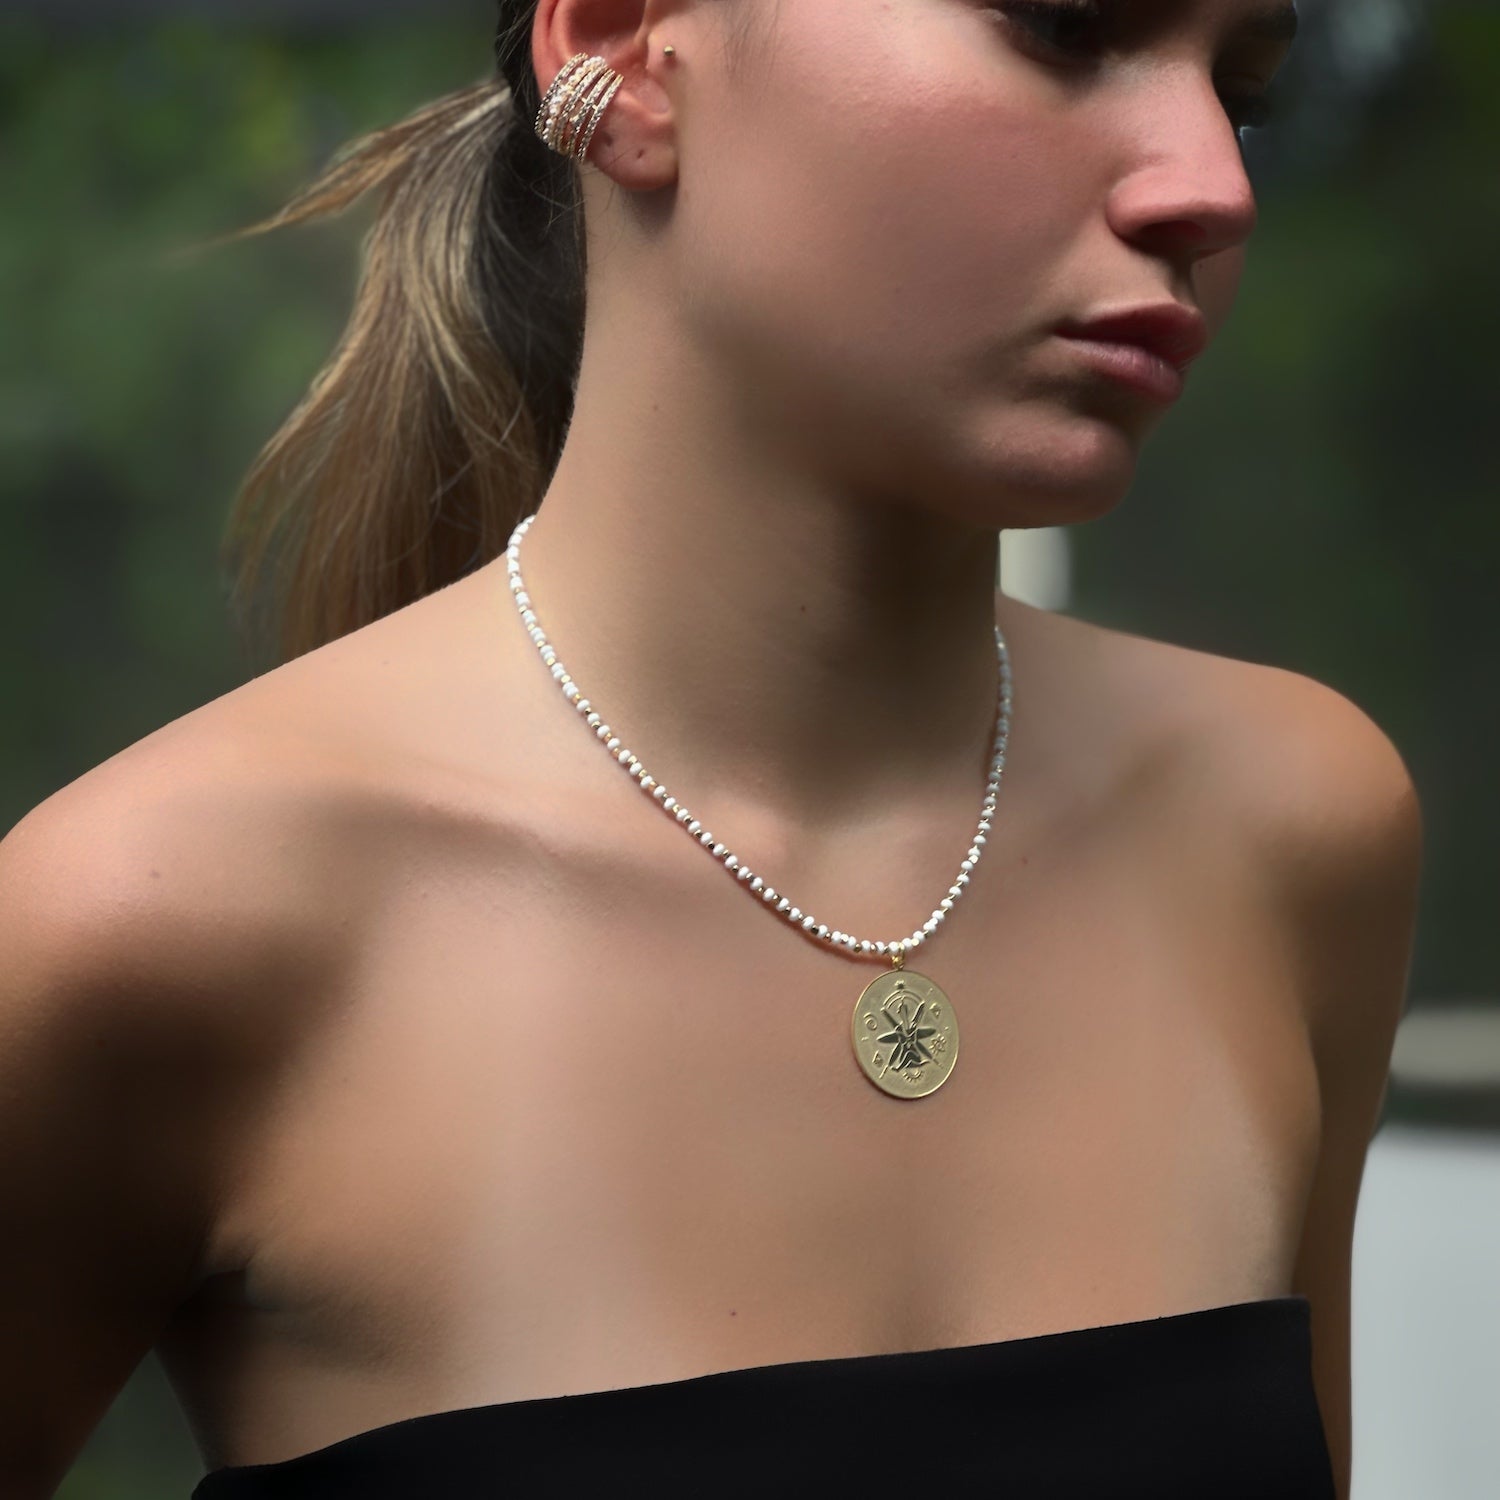 Model Adorns &quot;New Beginning Aura Necklace&quot; - Spirituality and Style.